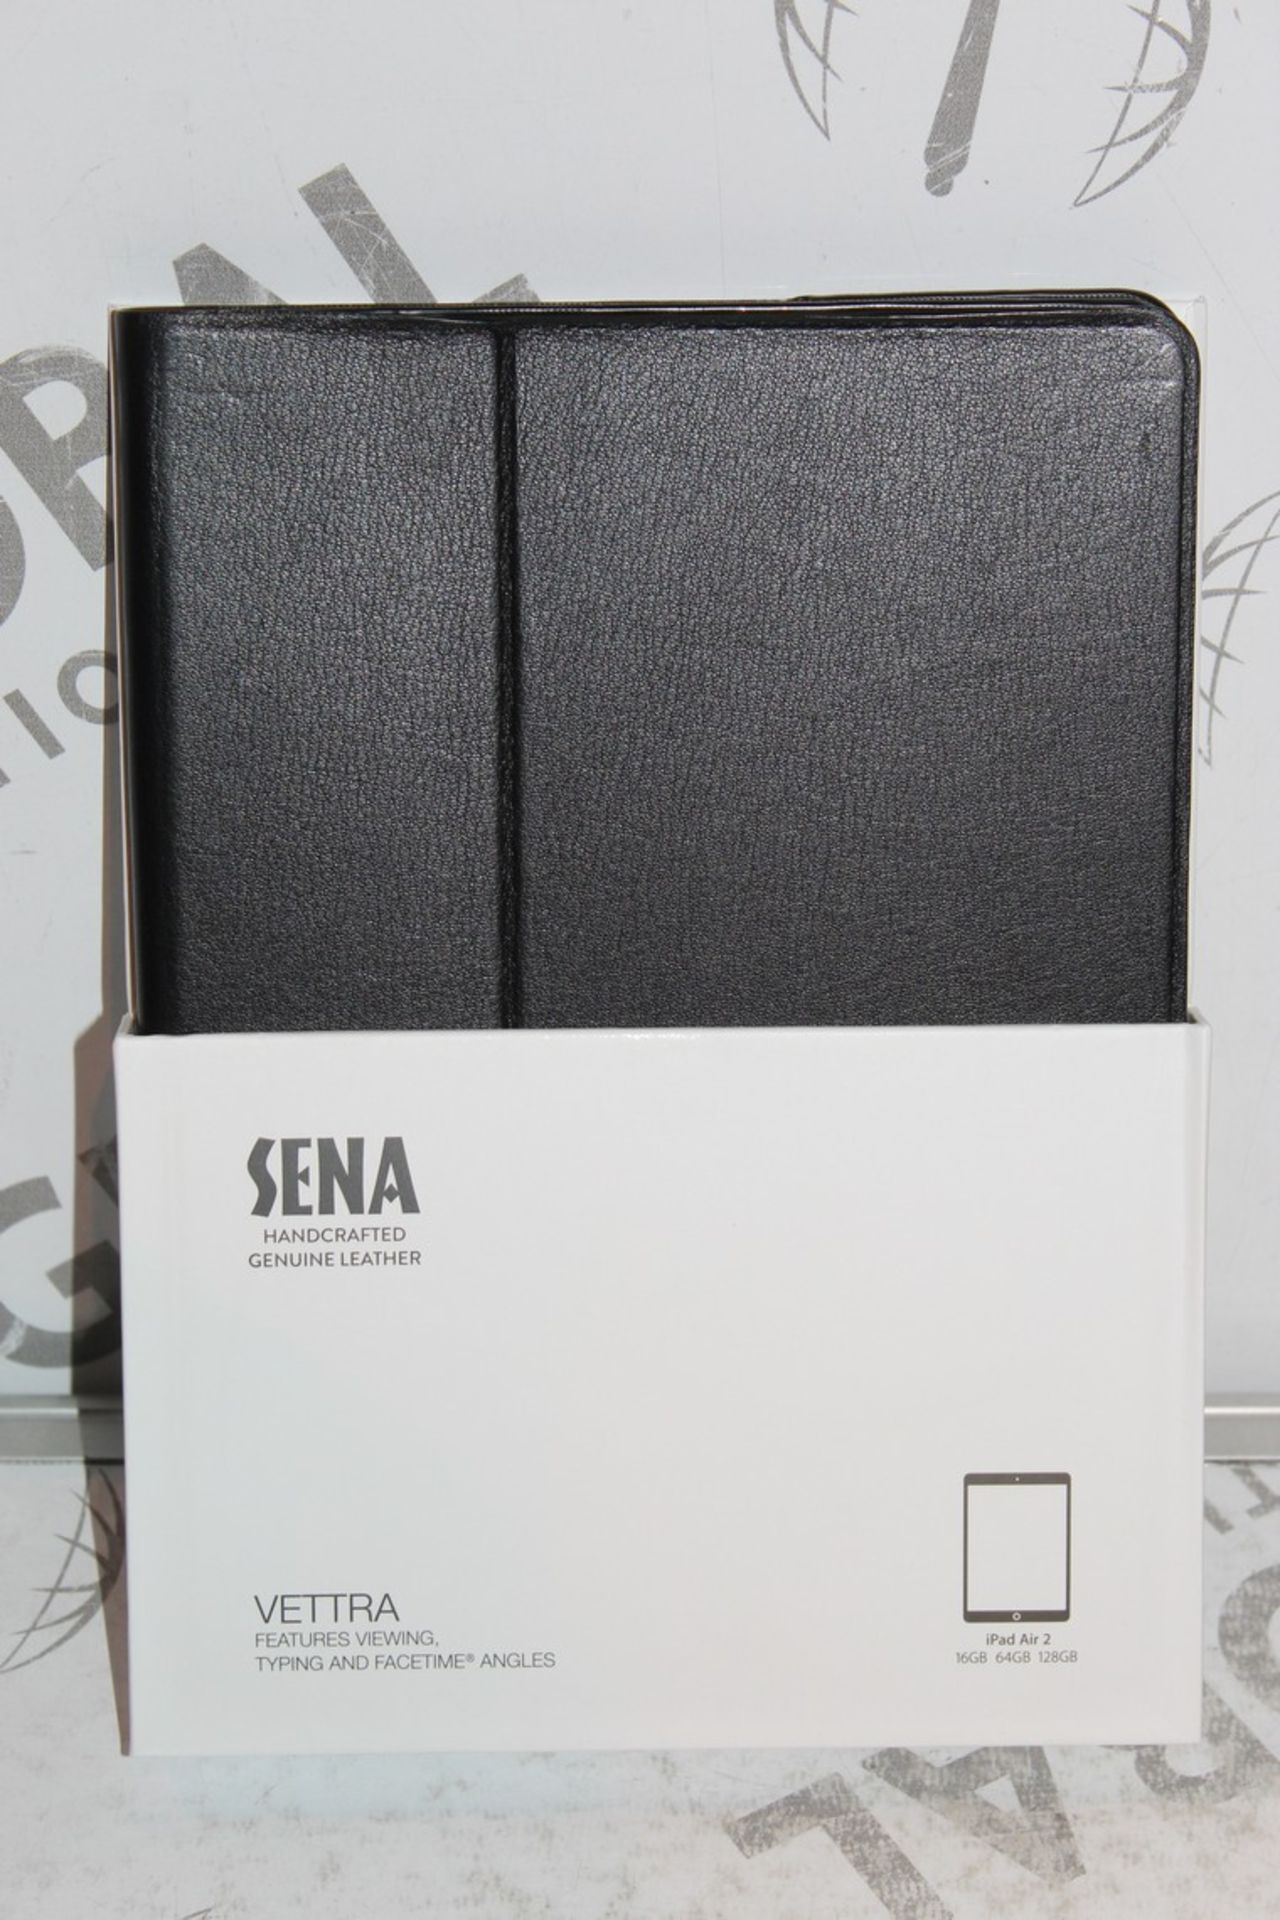 Lot to Contain 5 Brand New Sena Hand Crafted Genuine Leather Vectra iPad 2 Black iPad Cases